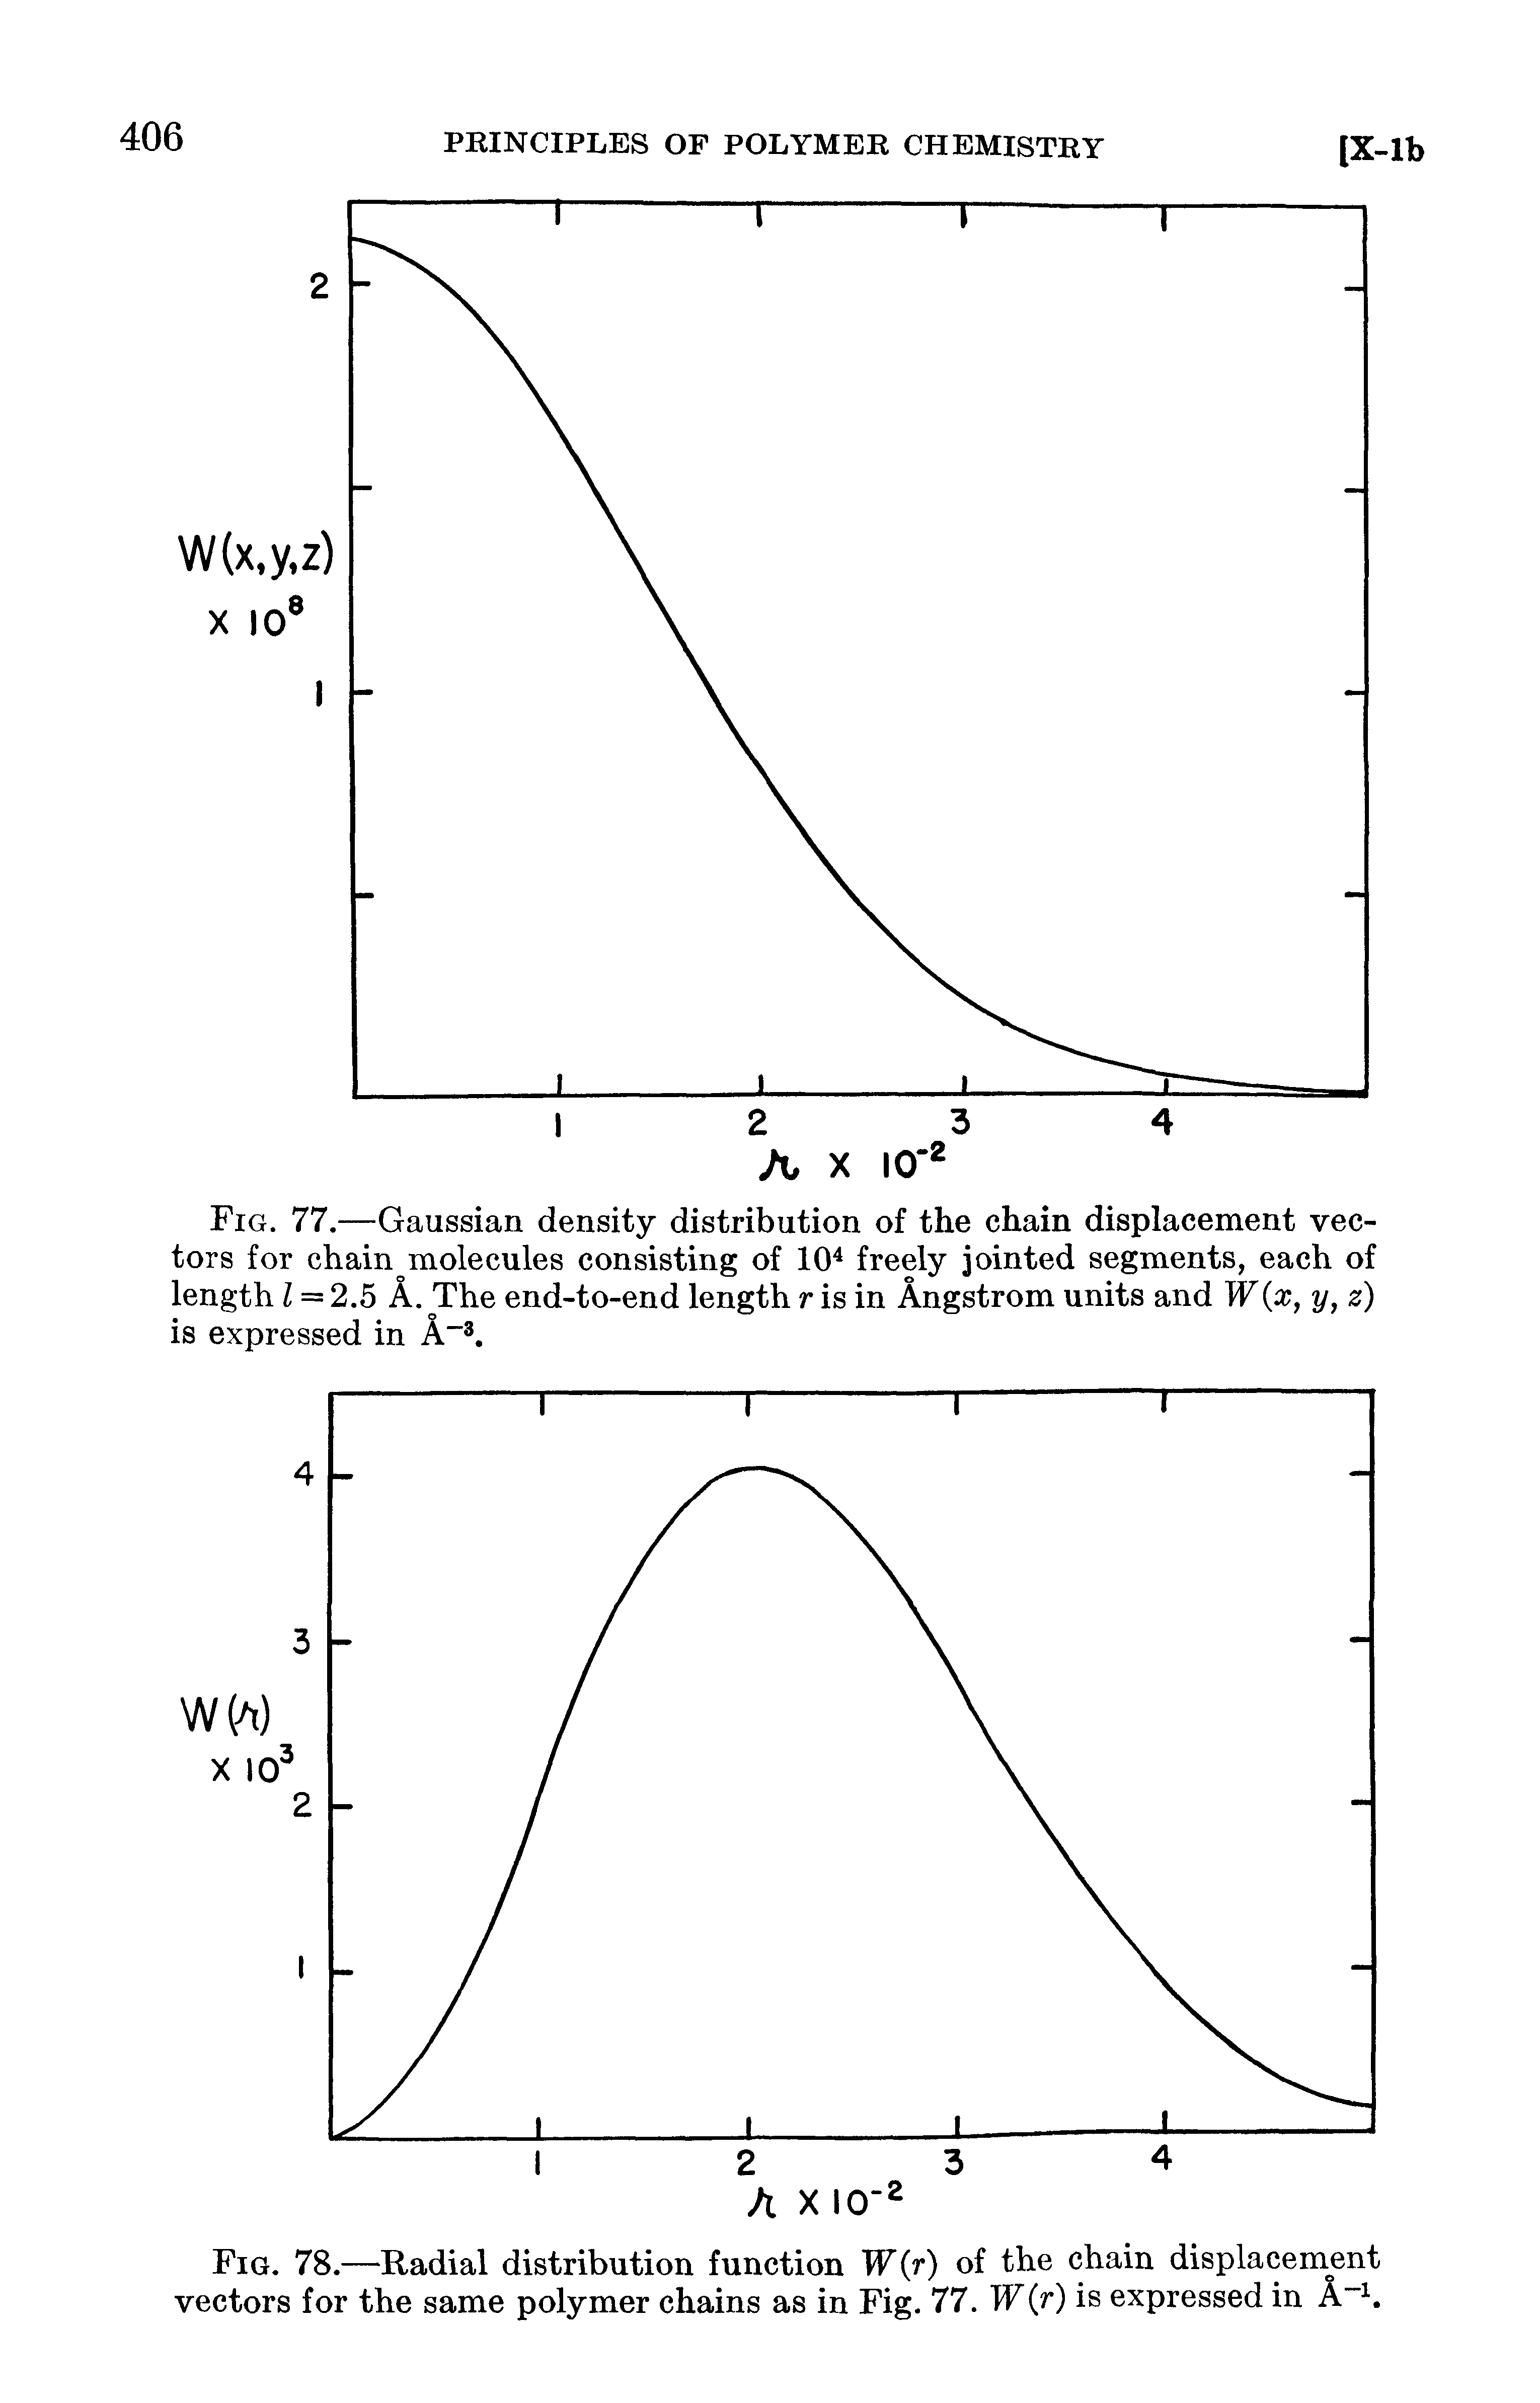 Fig. 78.—Radial distribution function W r) of the chain displacement vectors for the same polymer chains as in Fig. 77. W(r) is expressed in A"h...